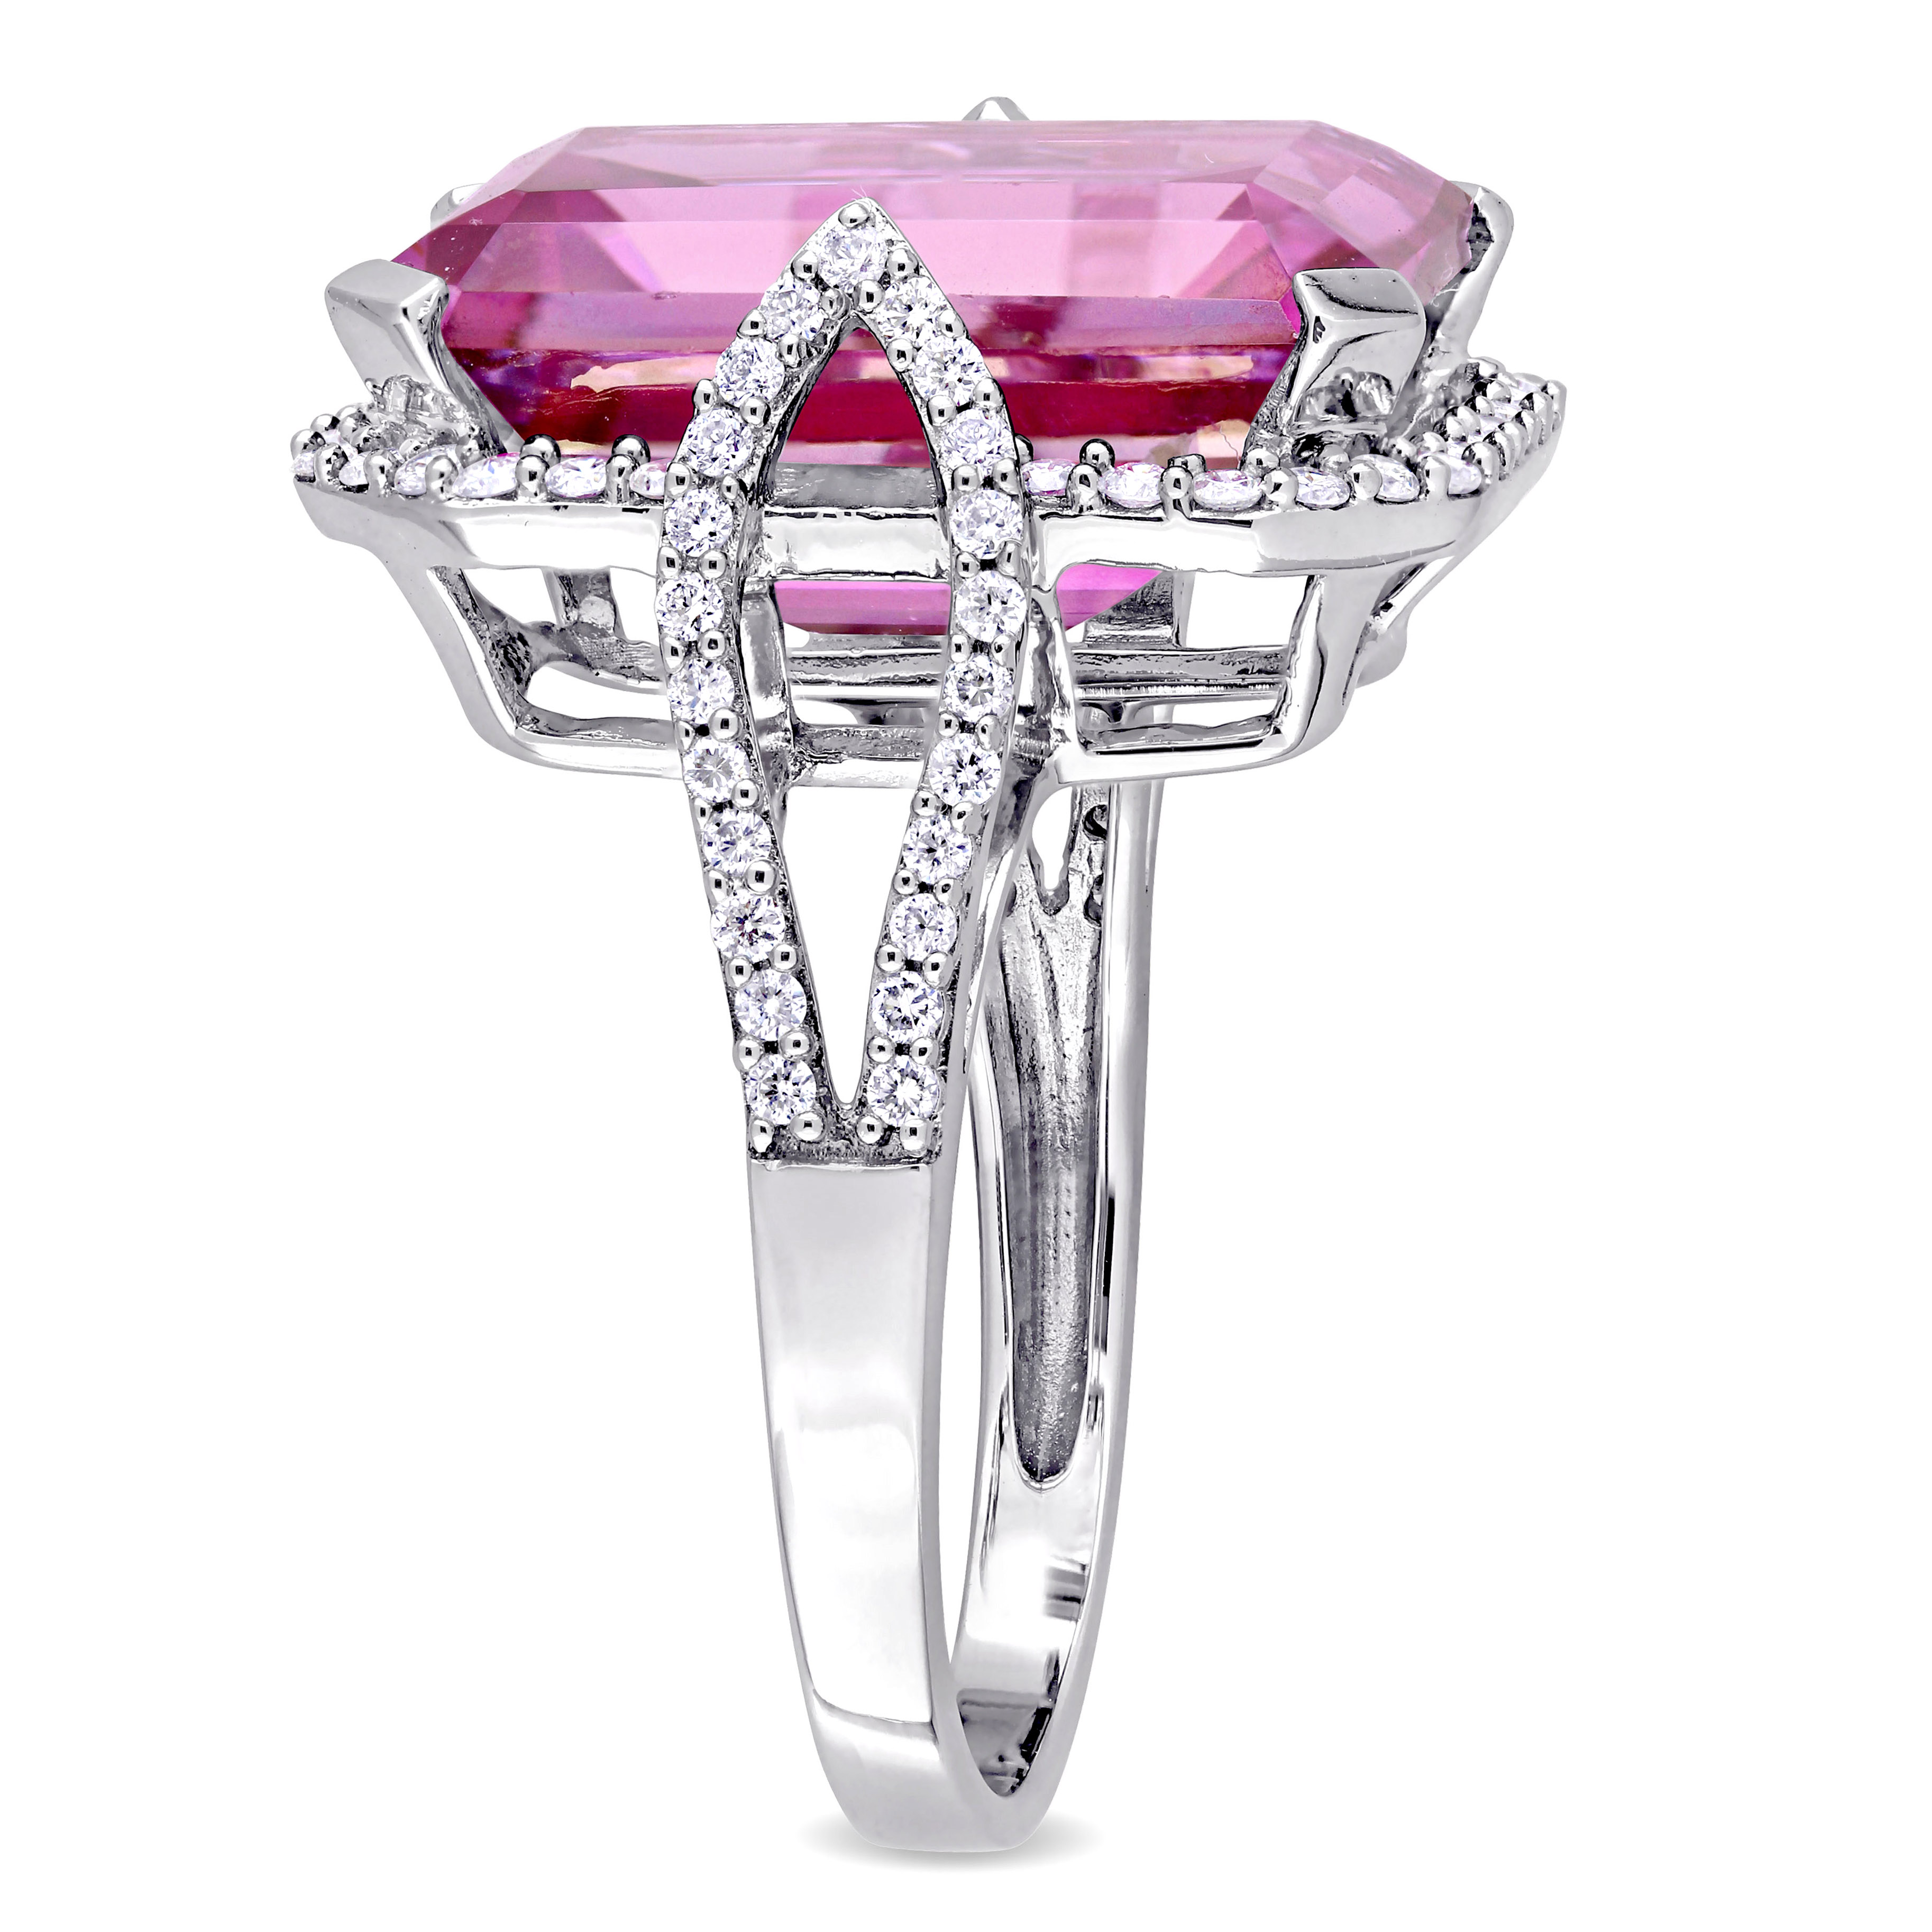 1/2 CT TW Diamond and 14 1/2 CT TGW Pink Topaz Octagon Ring in 14k White Gold